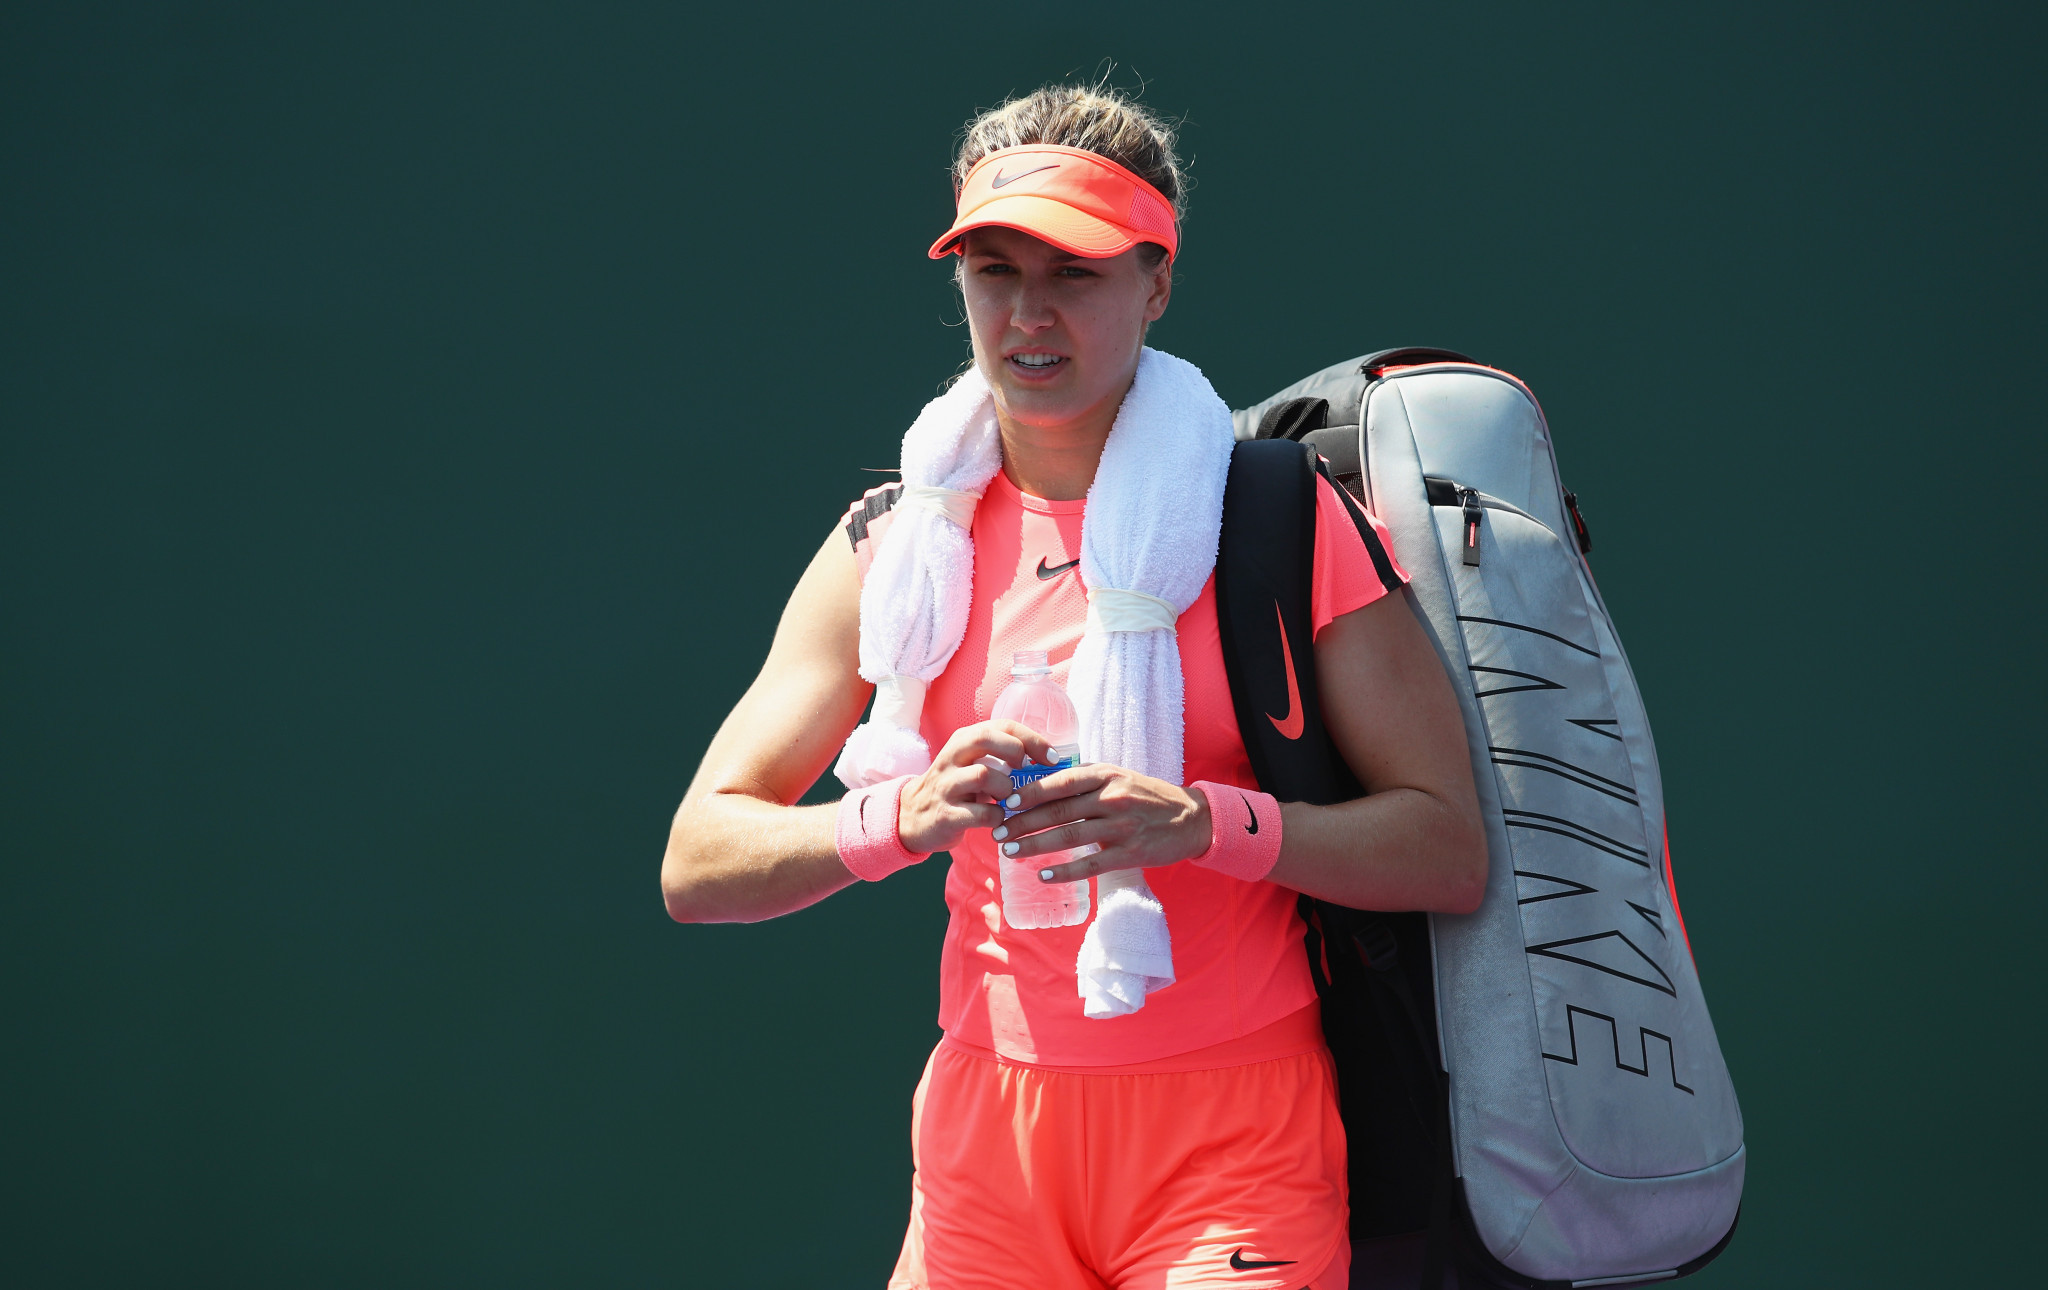 Flipkens earns second round place at Miami Open